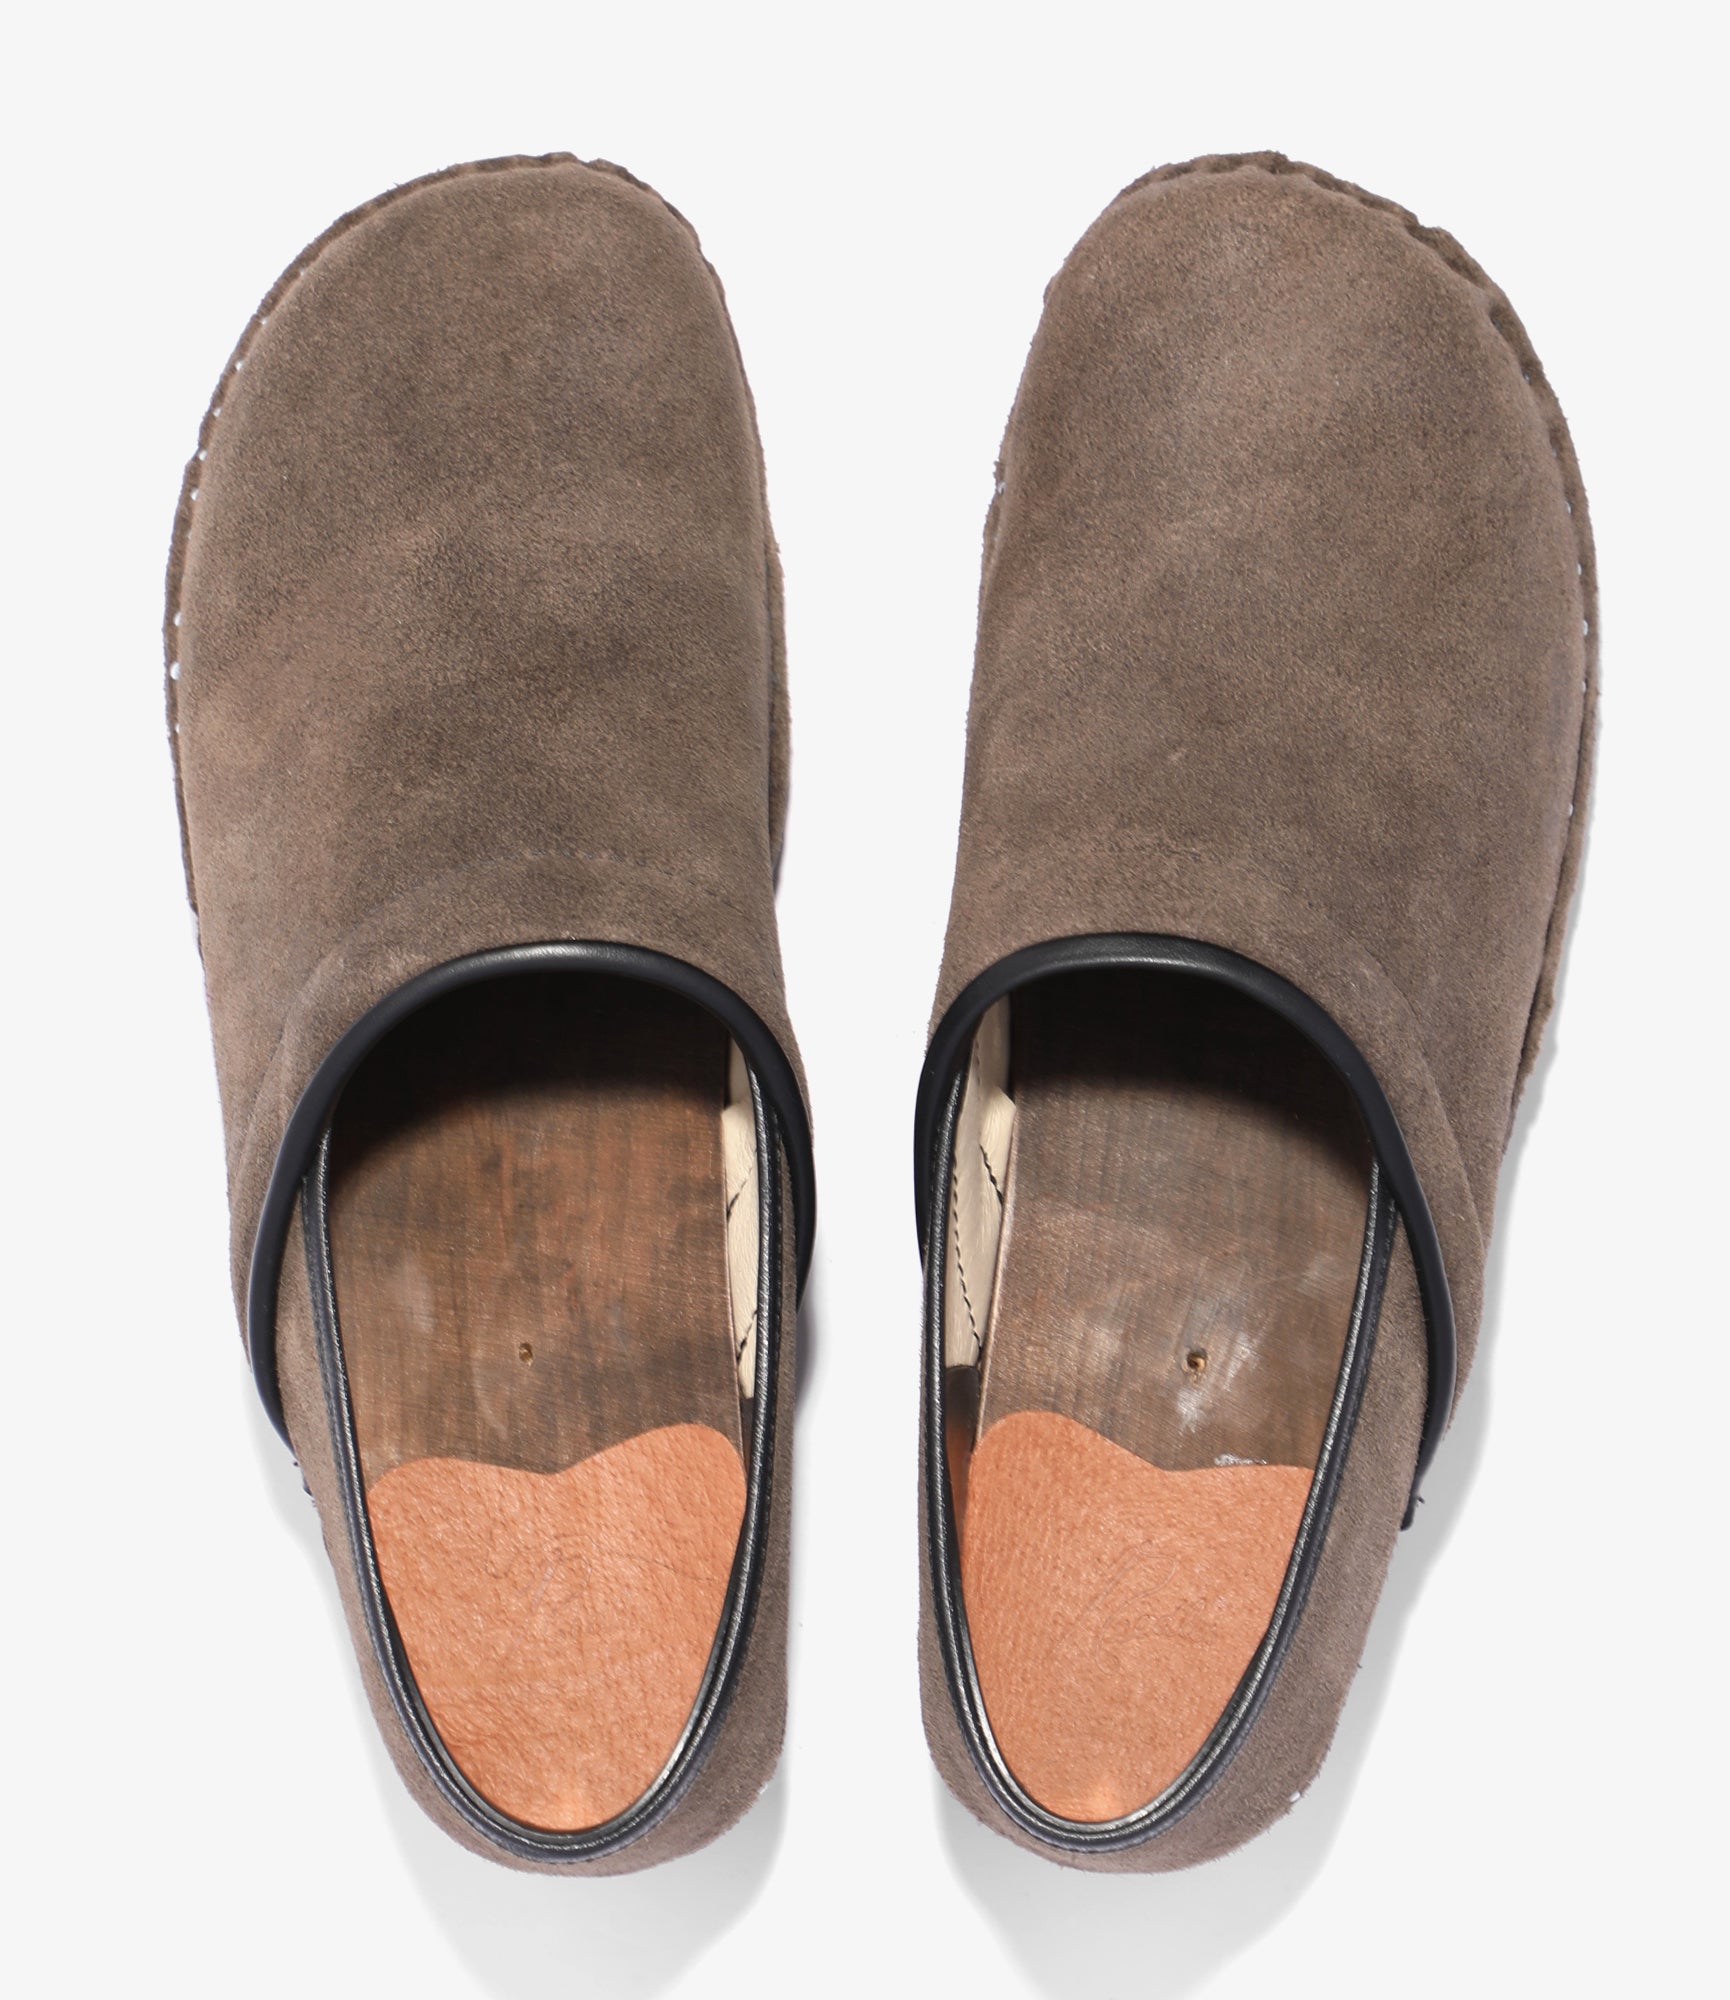 Needles x Troentorp - Closed Back Clog - Rough Out Taupe